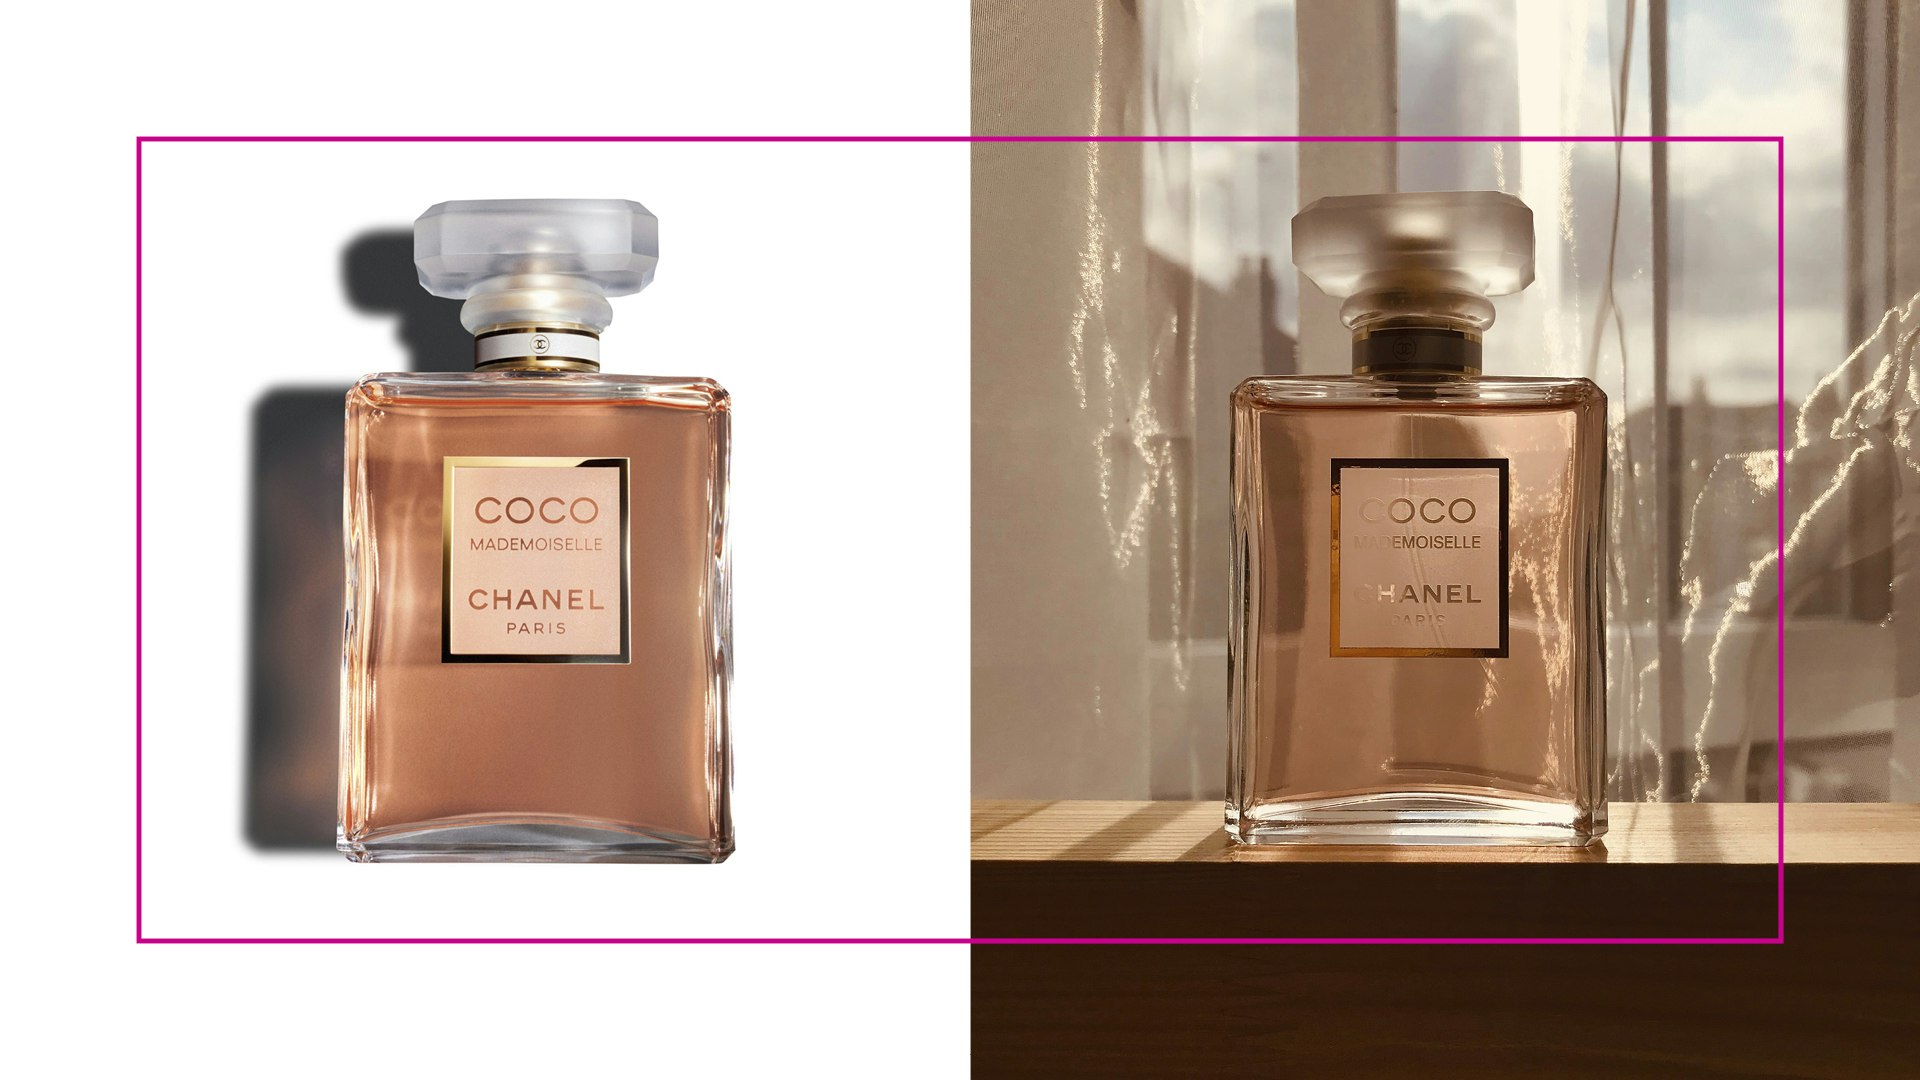 Whitney Peak is the New Face of COCO MADEMOISELLE